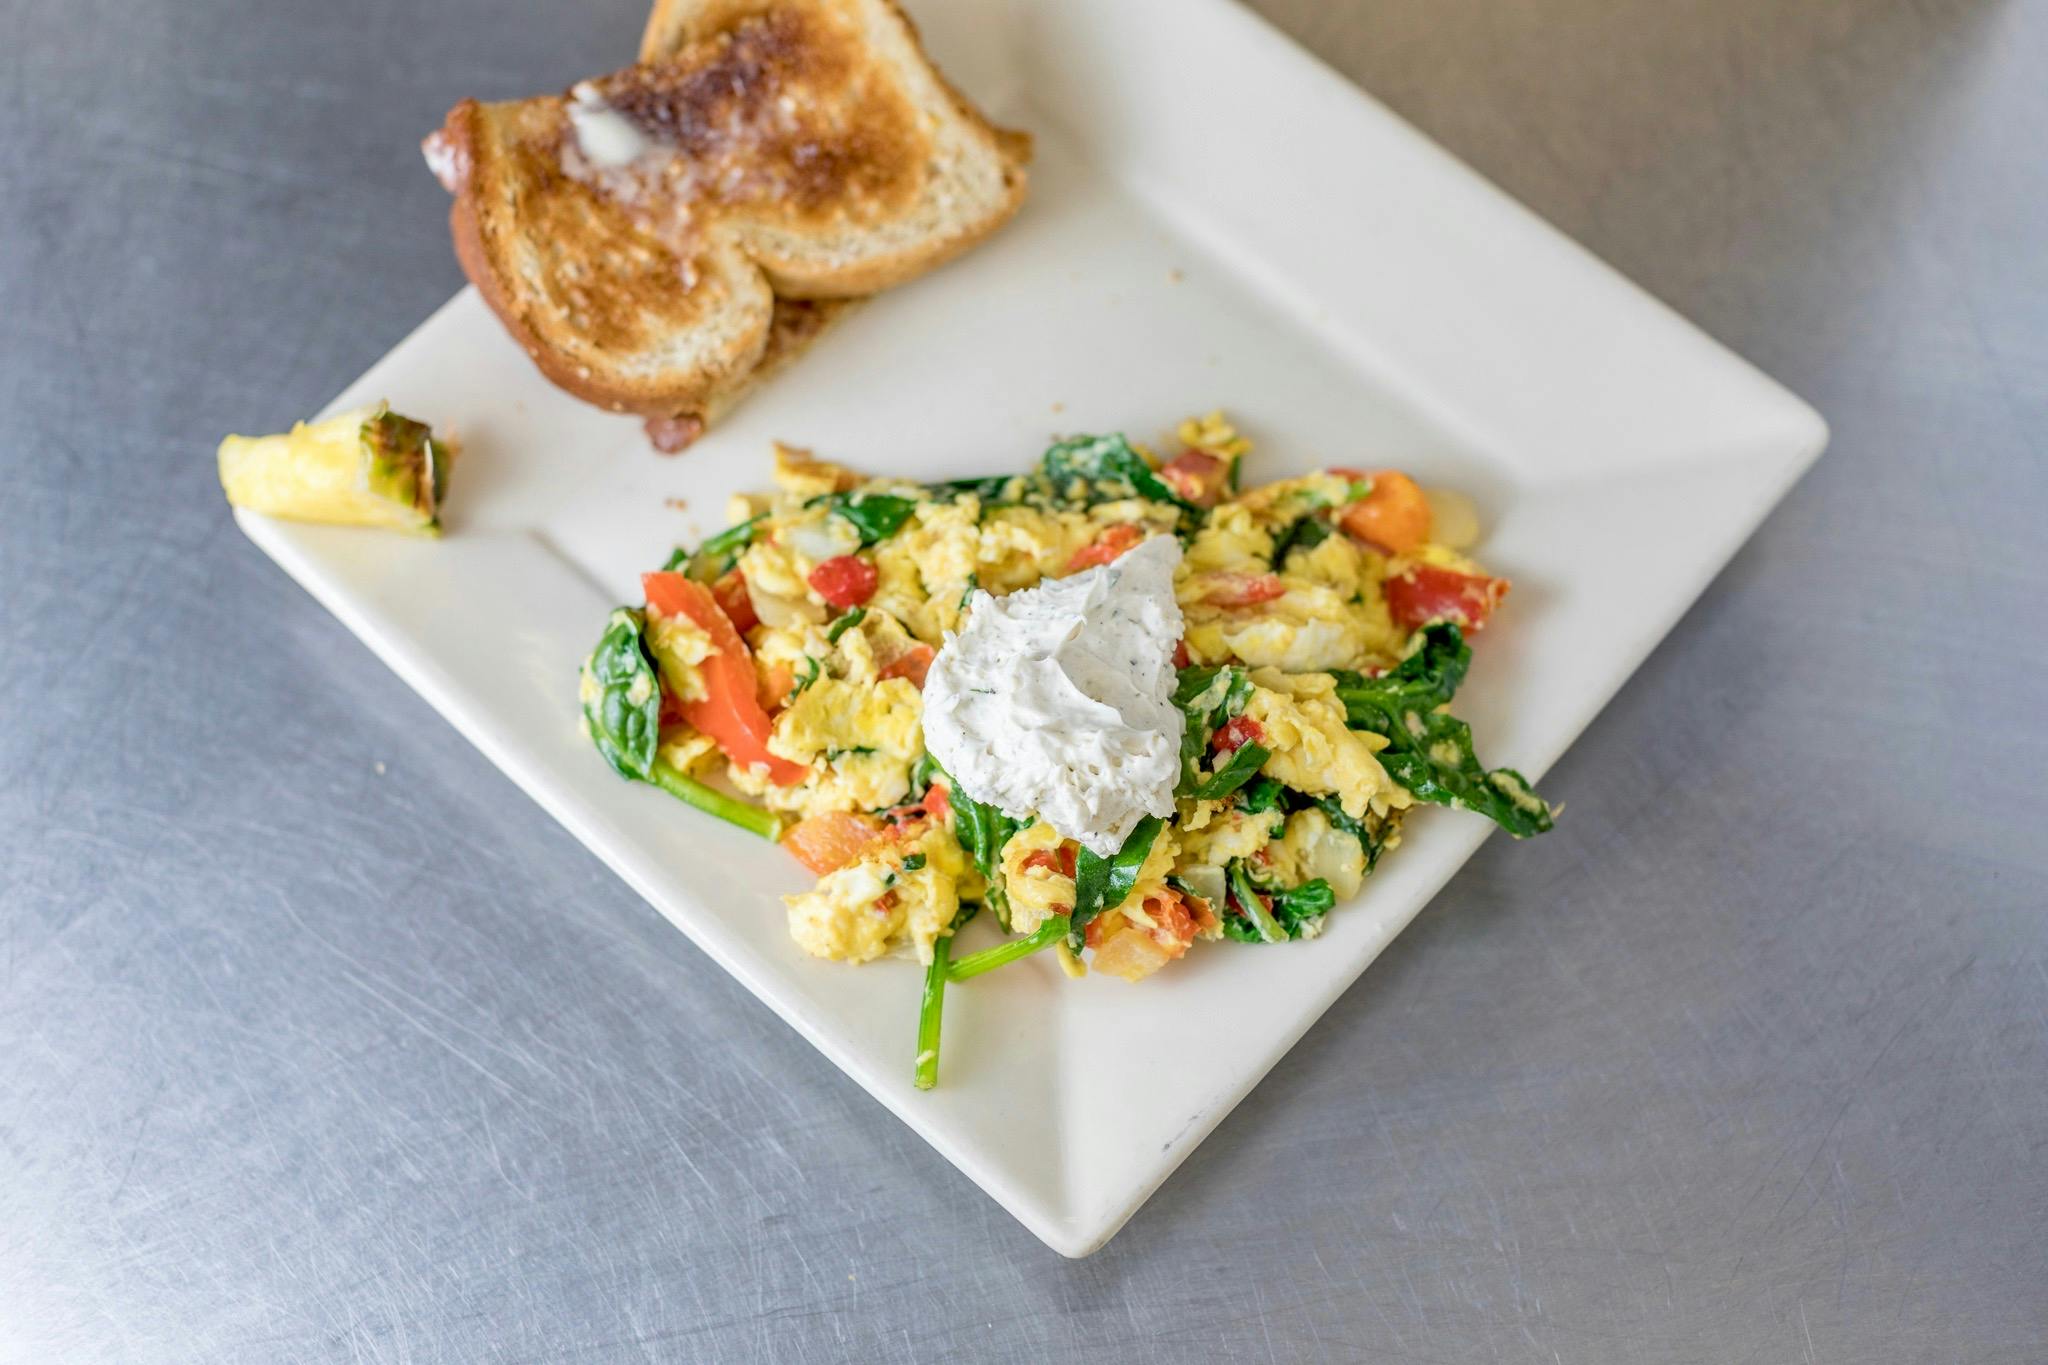 Herb Goat Cheese Scramble from The French Press in Eau Claire, WI